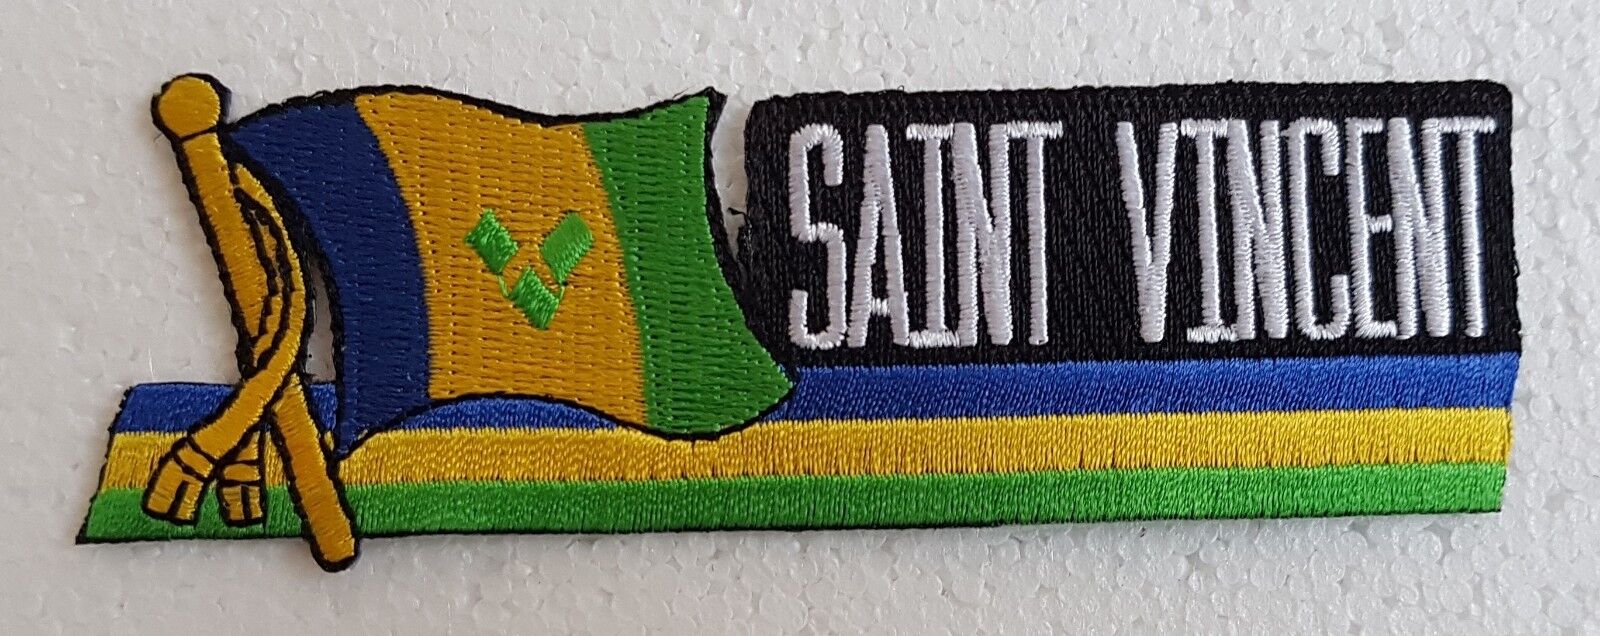 SAINT VINCENT AND THE GRENADINES FLAG LETTER PATCH Badge Caribbean West Indies